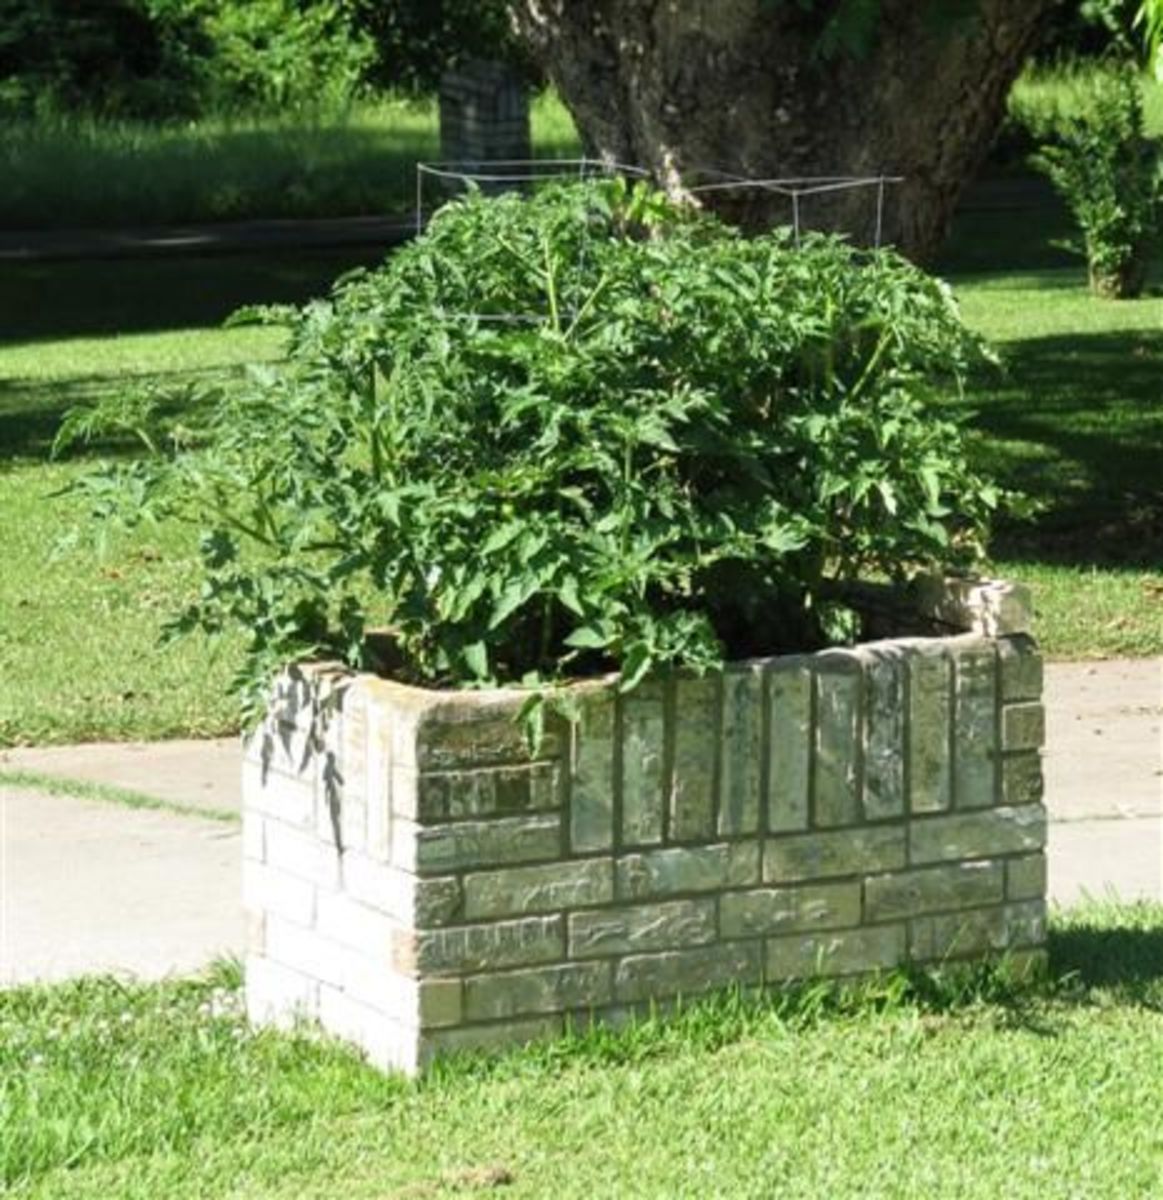 Tomato plants growing in an ornamental planter.